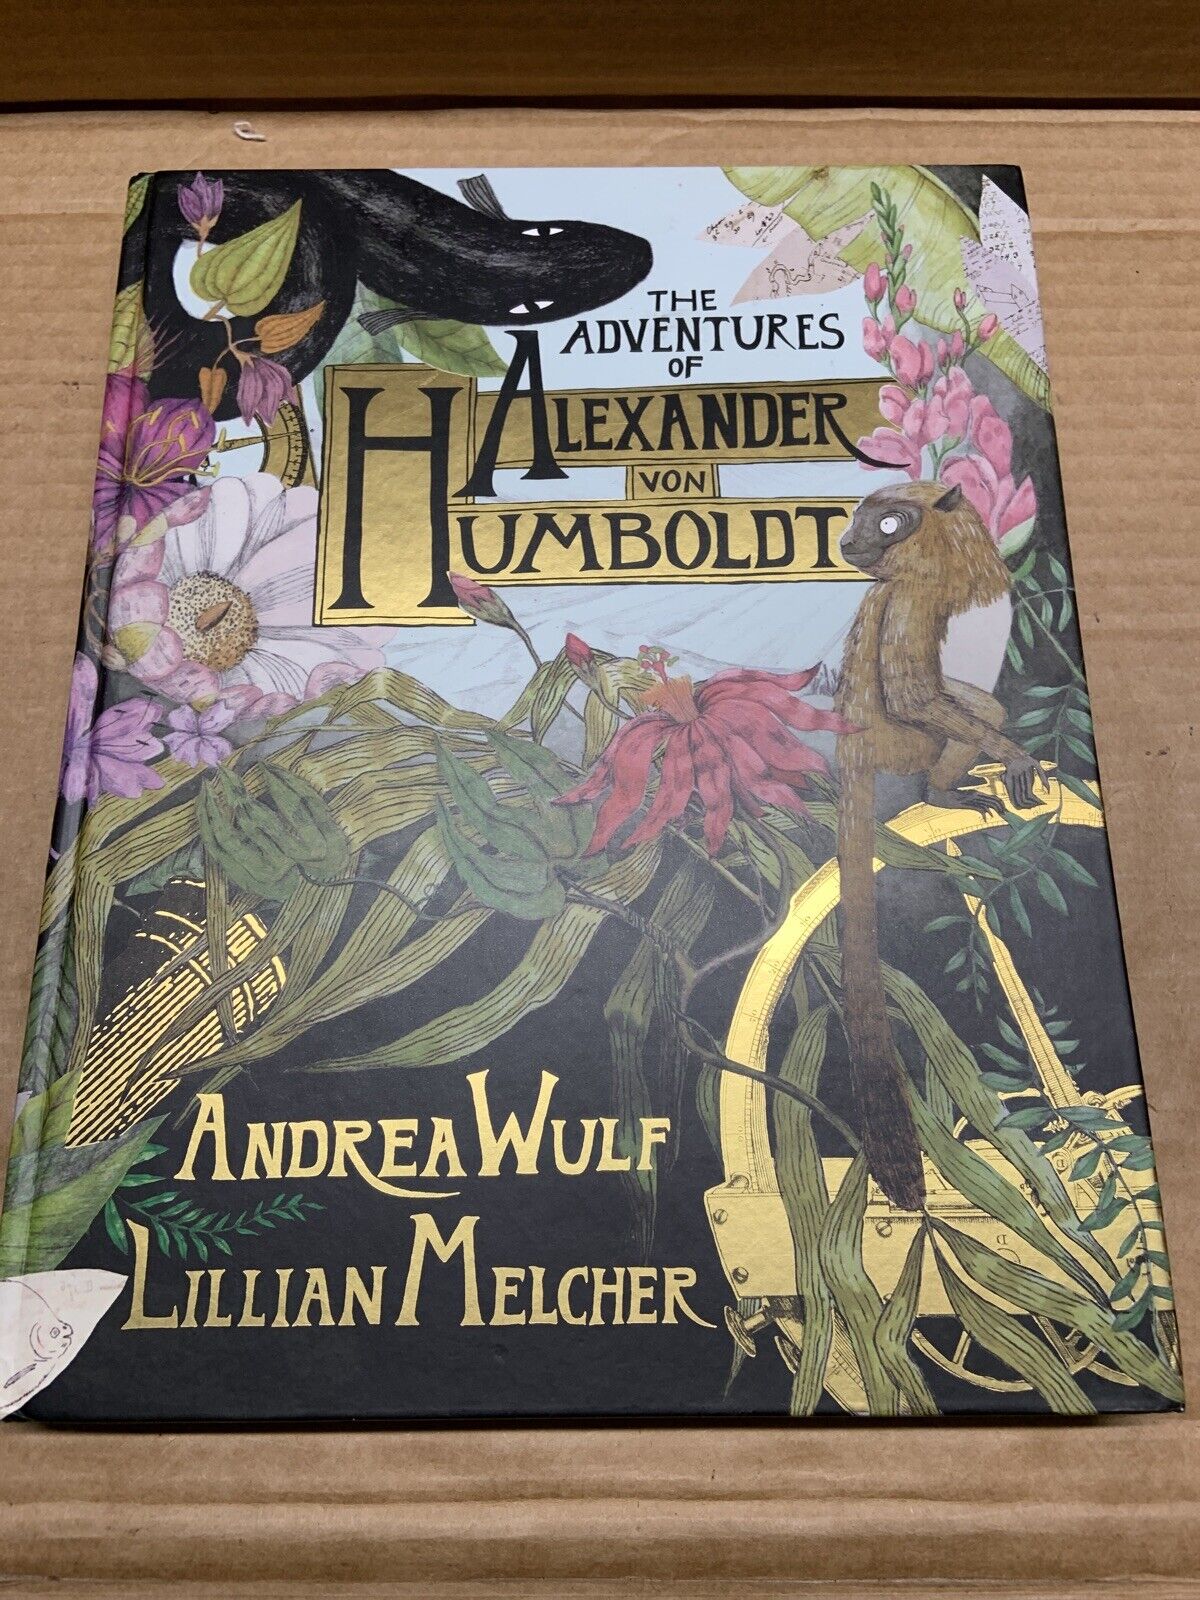 The Adventures of Alexander Von Humboldt by Andrea Wulf